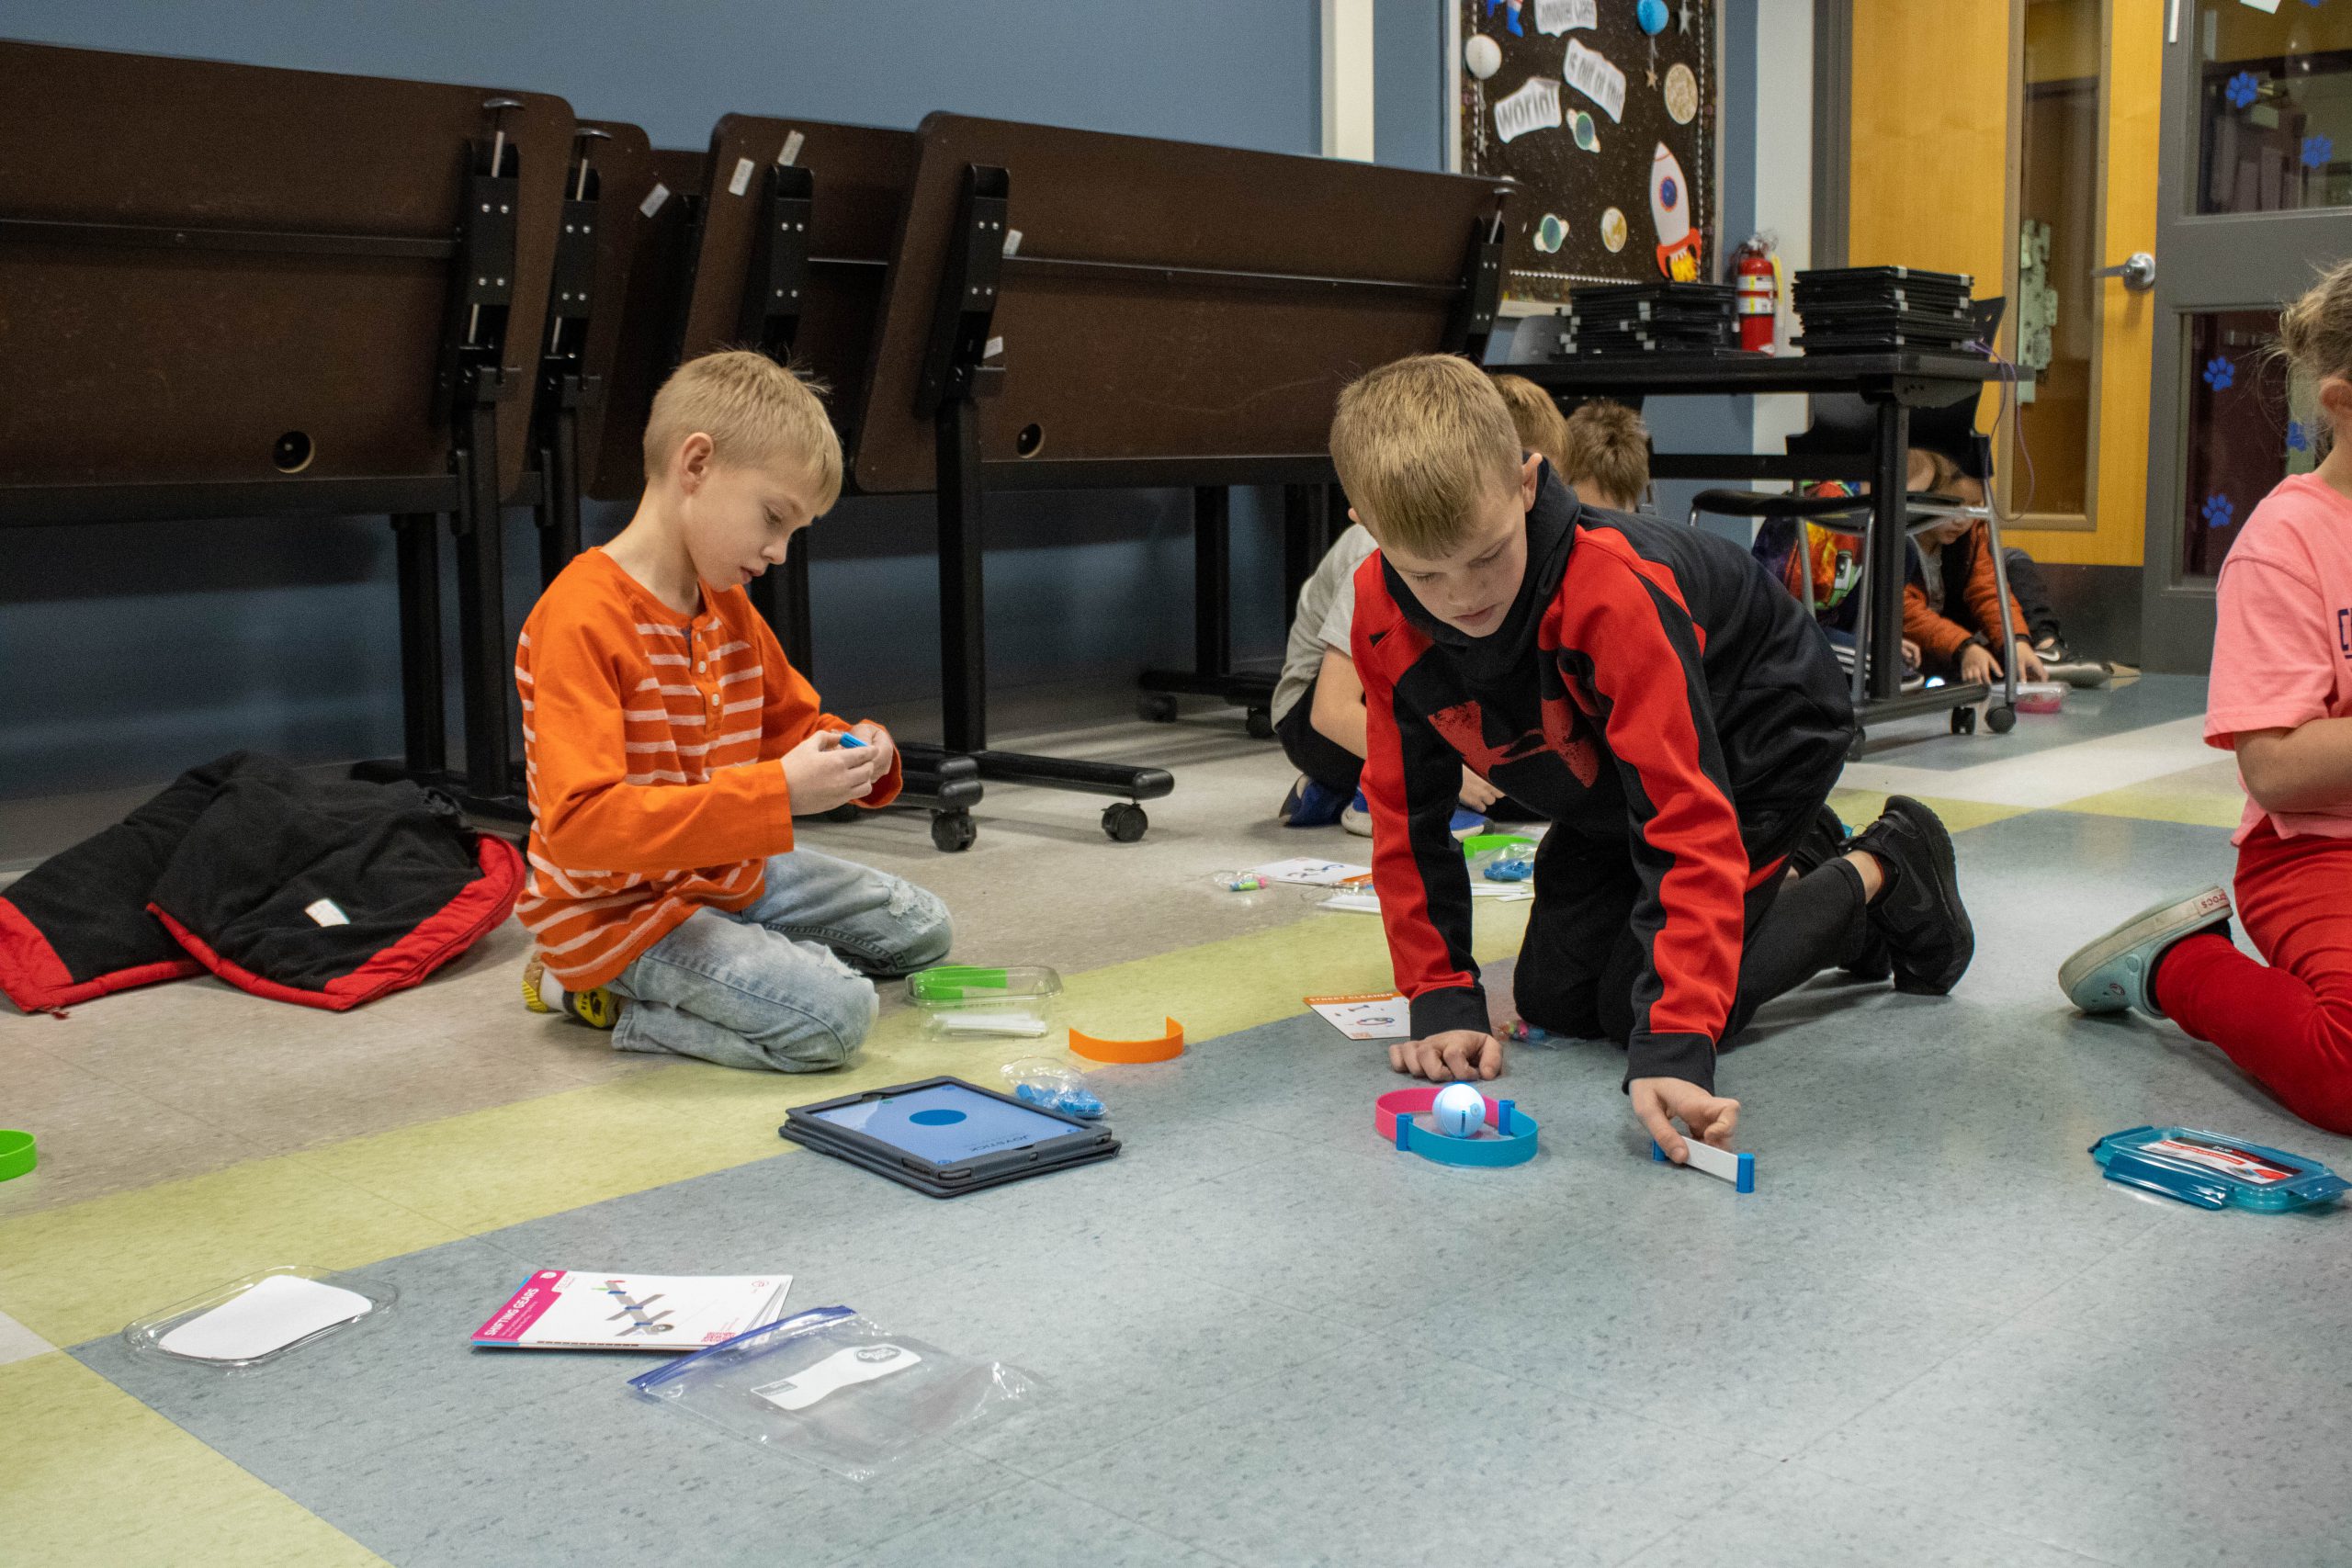 Students playing with spheros in computer class